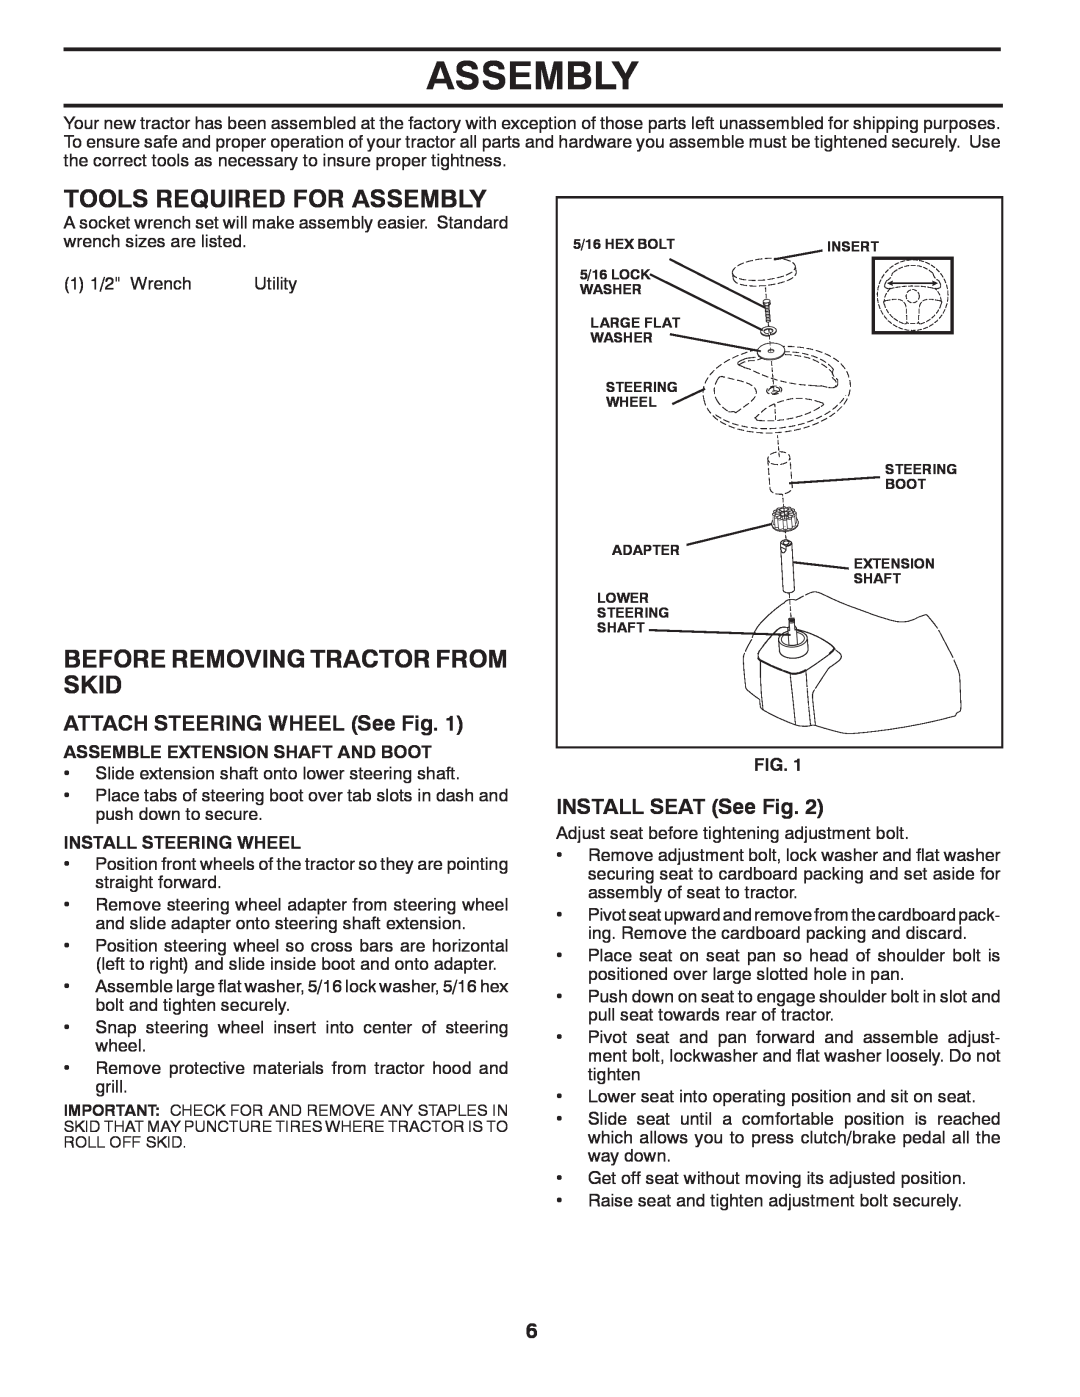 Poulan 96012008300 manual Tools Required For Assembly, Before Removing Tractor From Skid, ATTACH STEERING WHEEL See Fig 